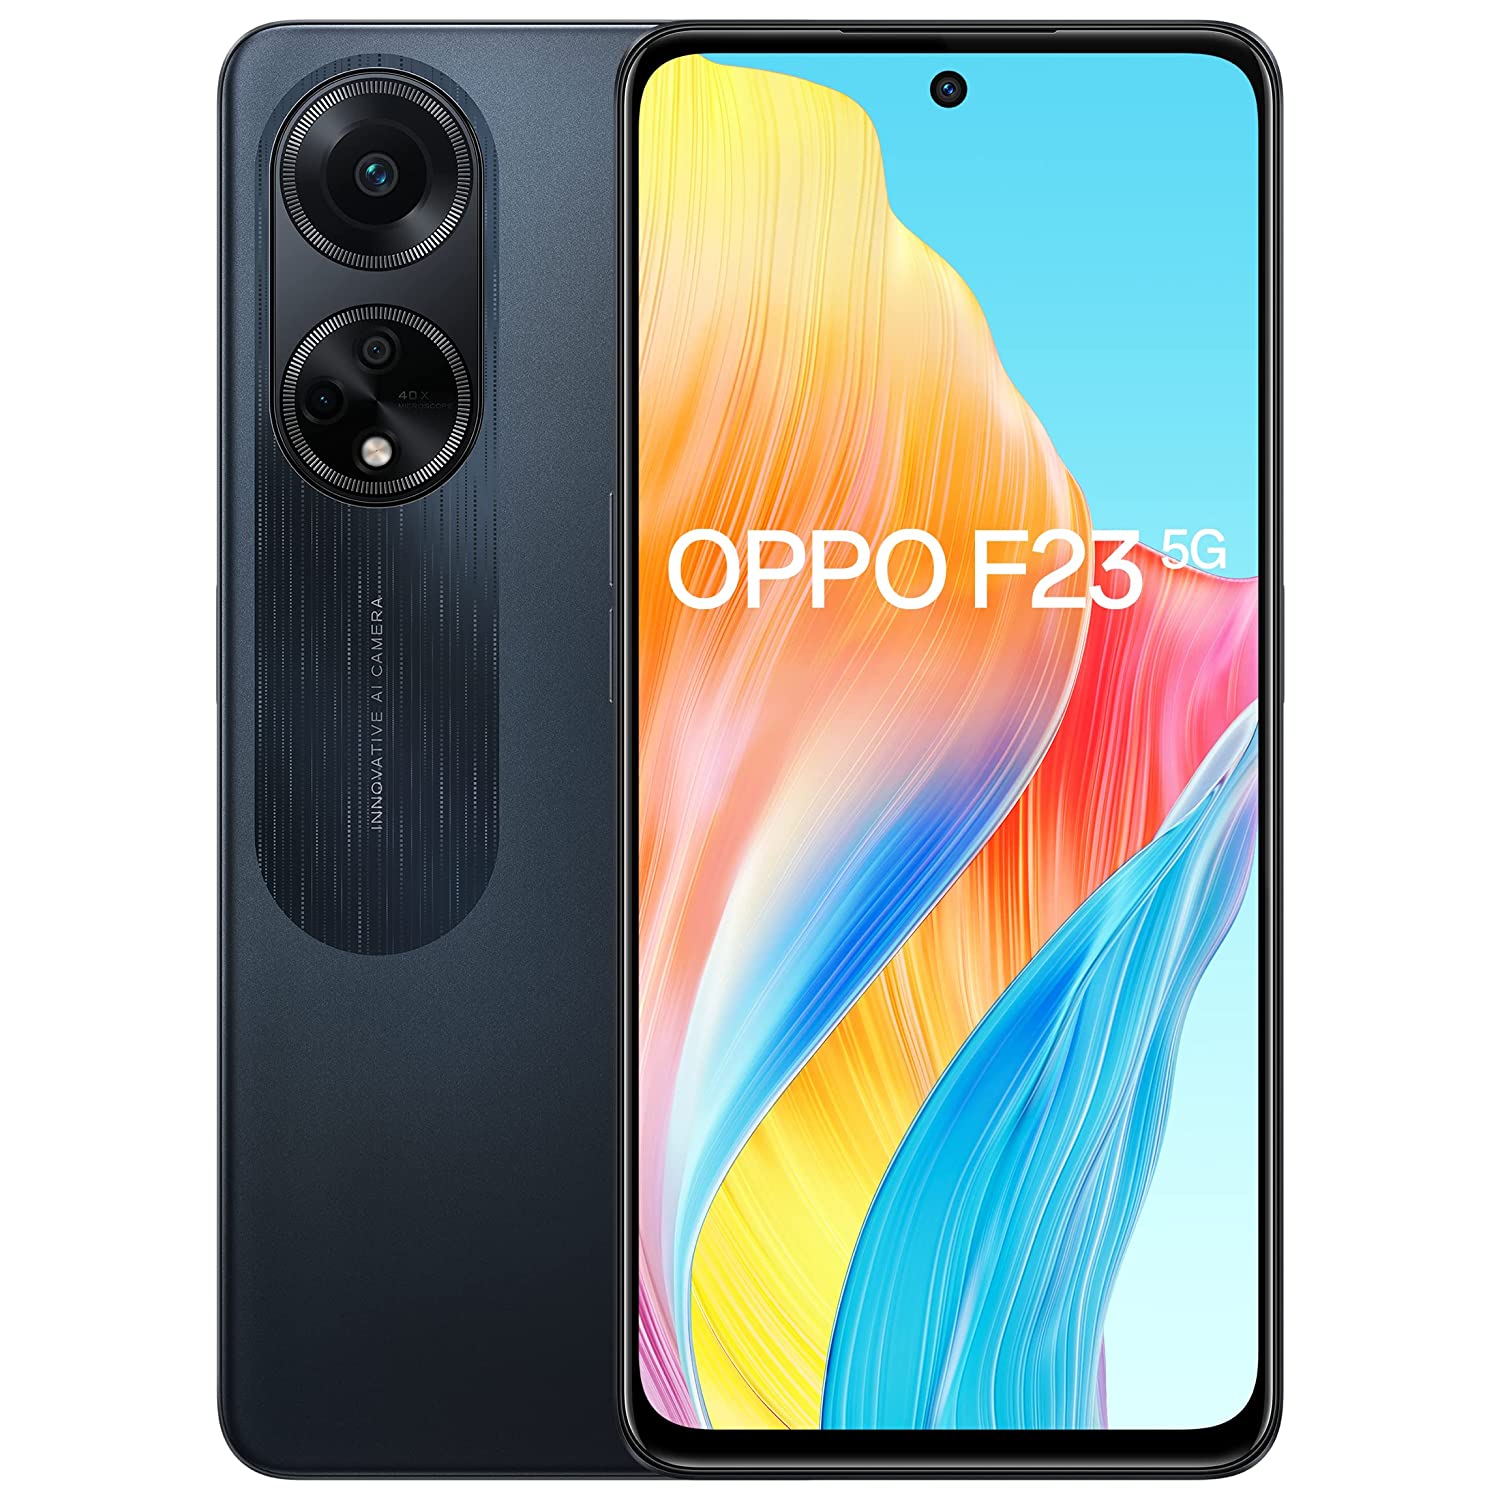 Oppo F23 5G (Cool Black, 8GB RAM, 256GB Storage) | 5000 mAh Battery with 67W SUPERVOOC Charger | 64MP Rear Triple AI Camera with Microlens | 6.72" FHD+ 120Hz Display